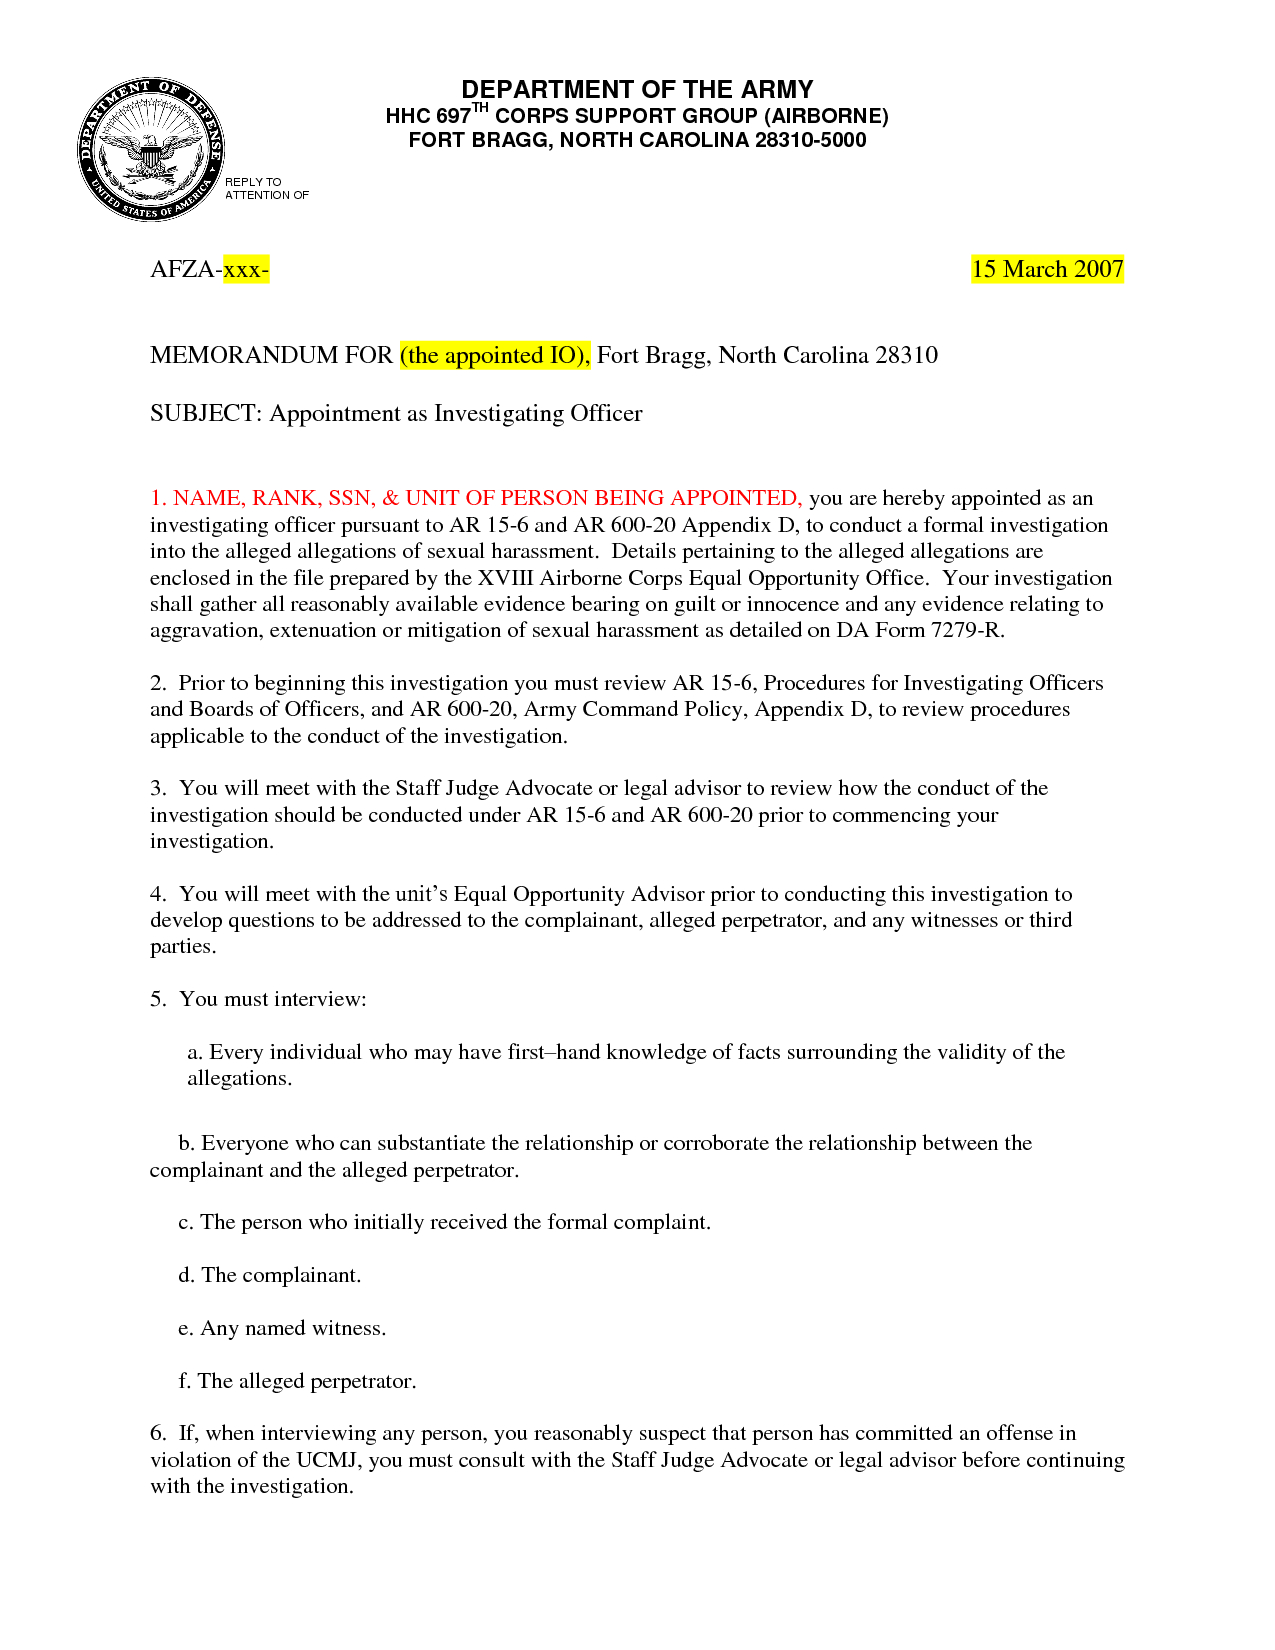 Army Memo Example Template | Free Cover Letter Templates Pertaining To Army Memorandum Template Word